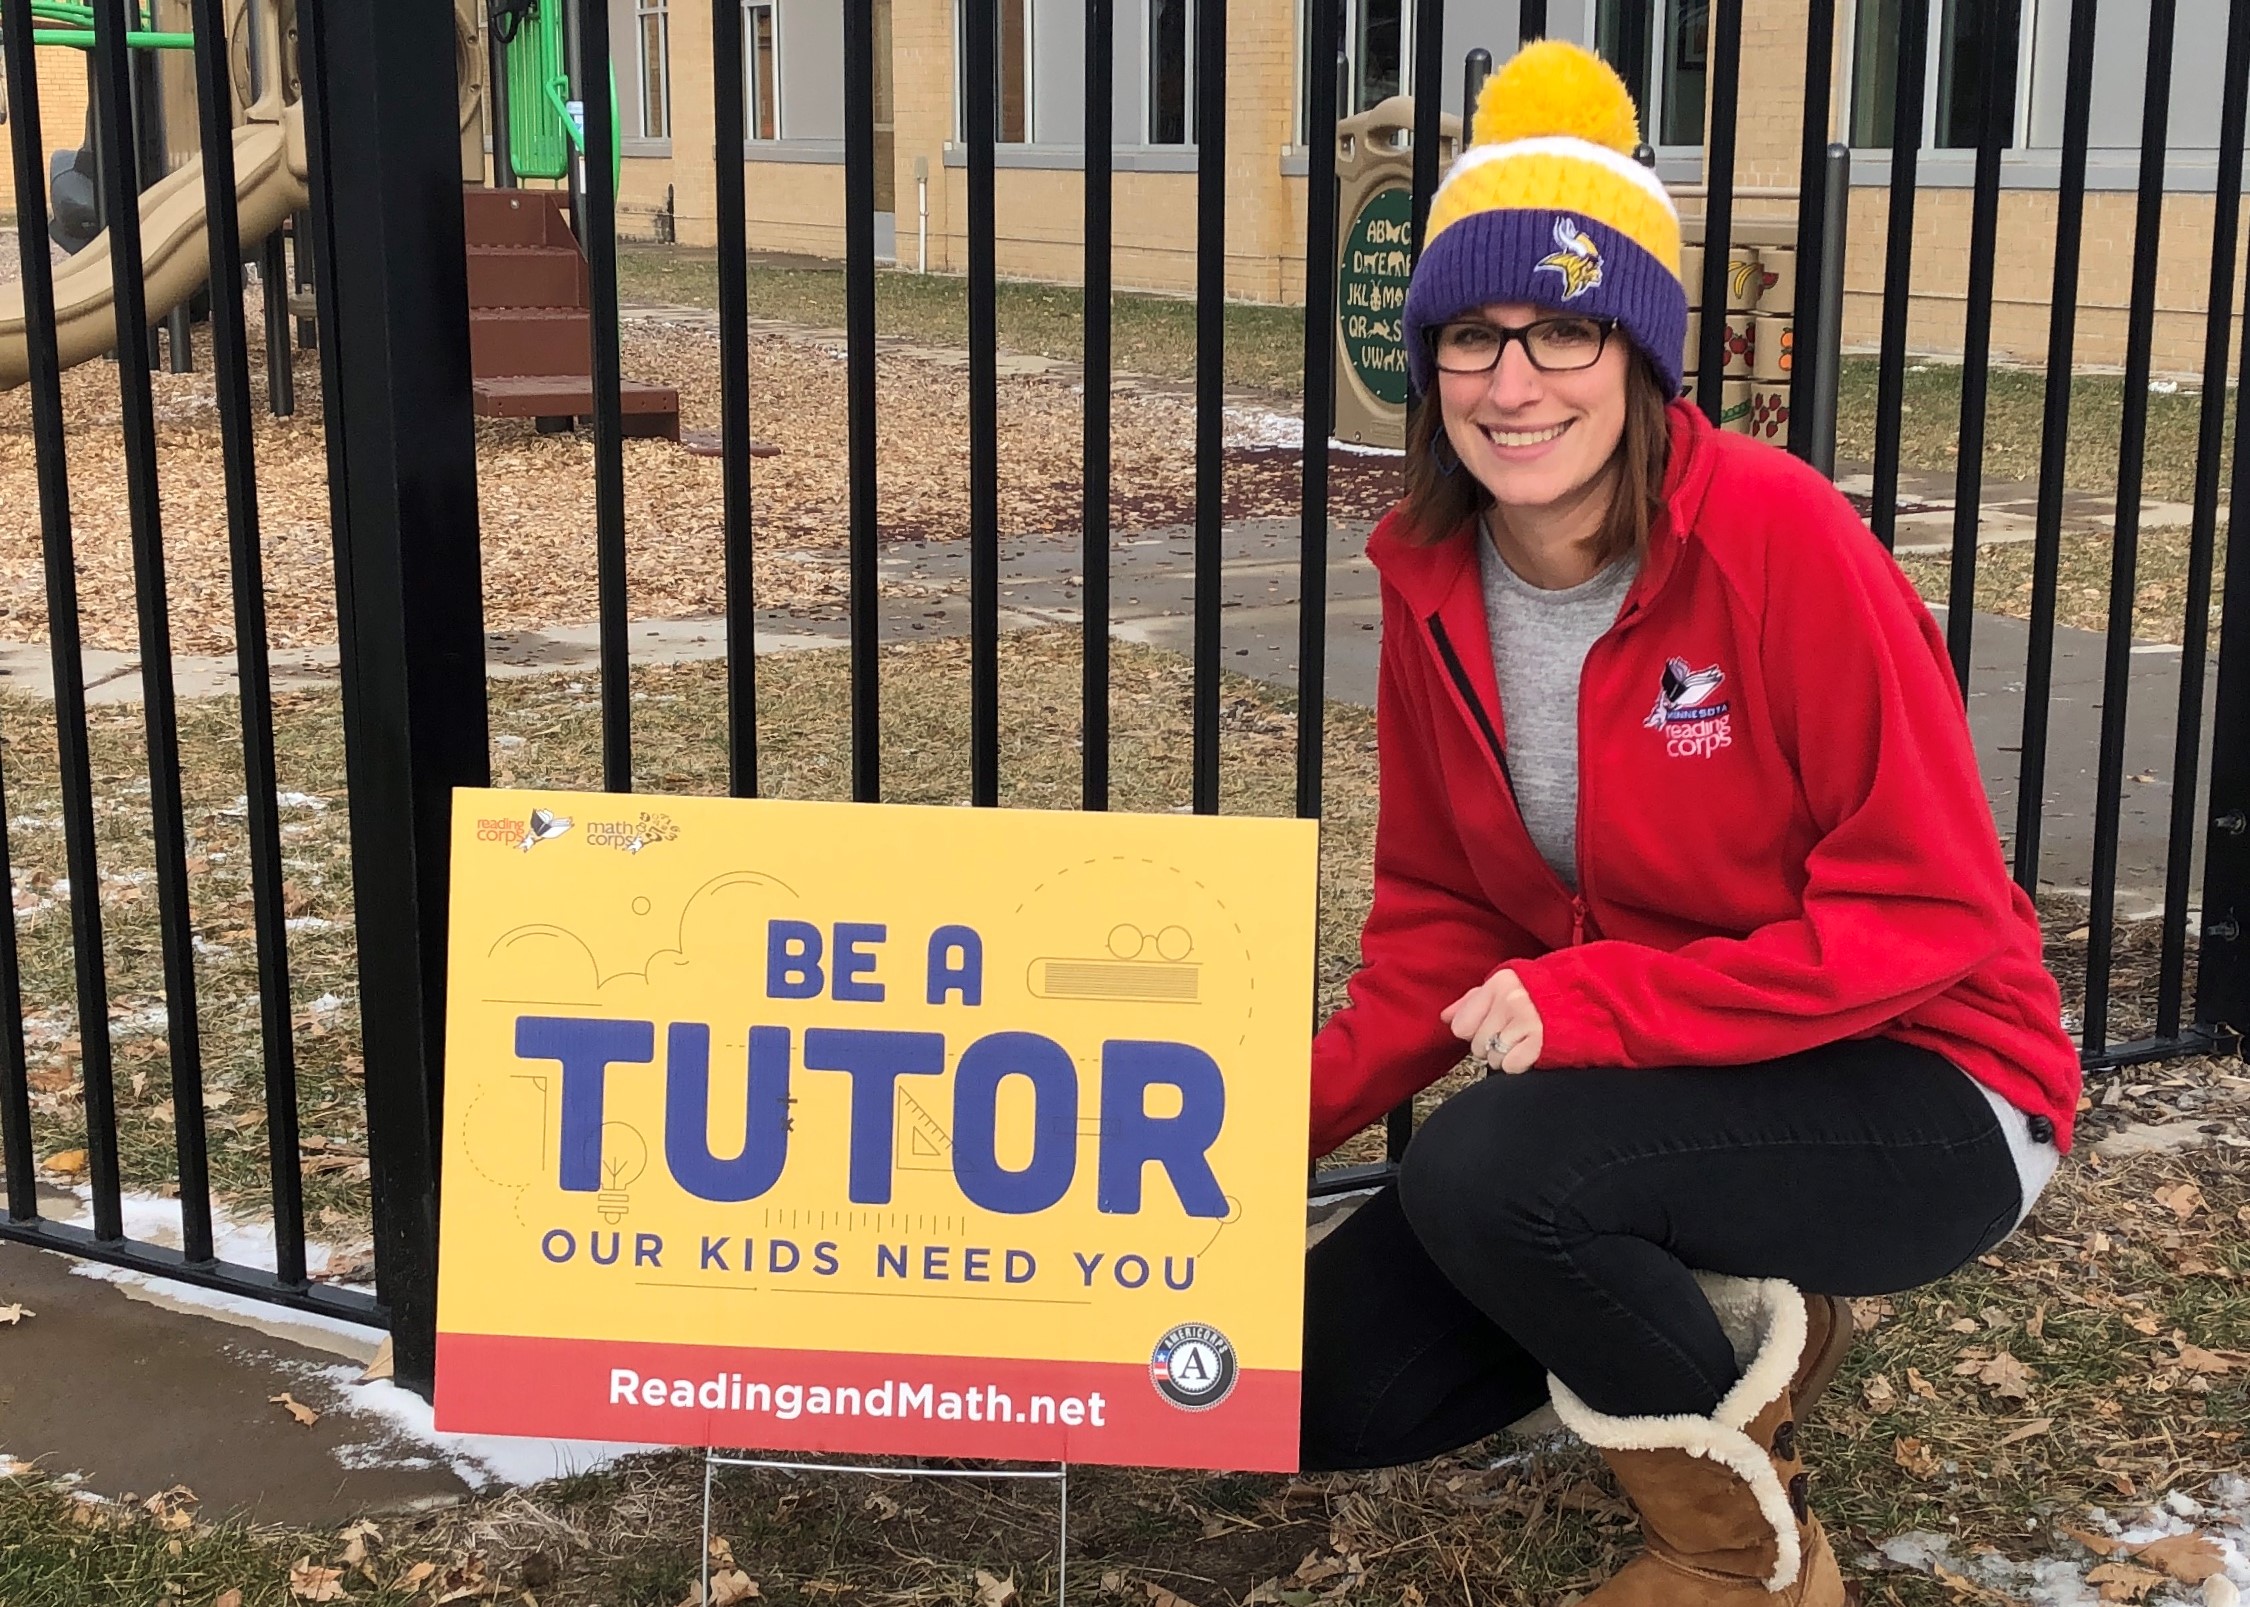 Reading Corps tutor Brianna poses next to yard sign which reads Be a Tutor